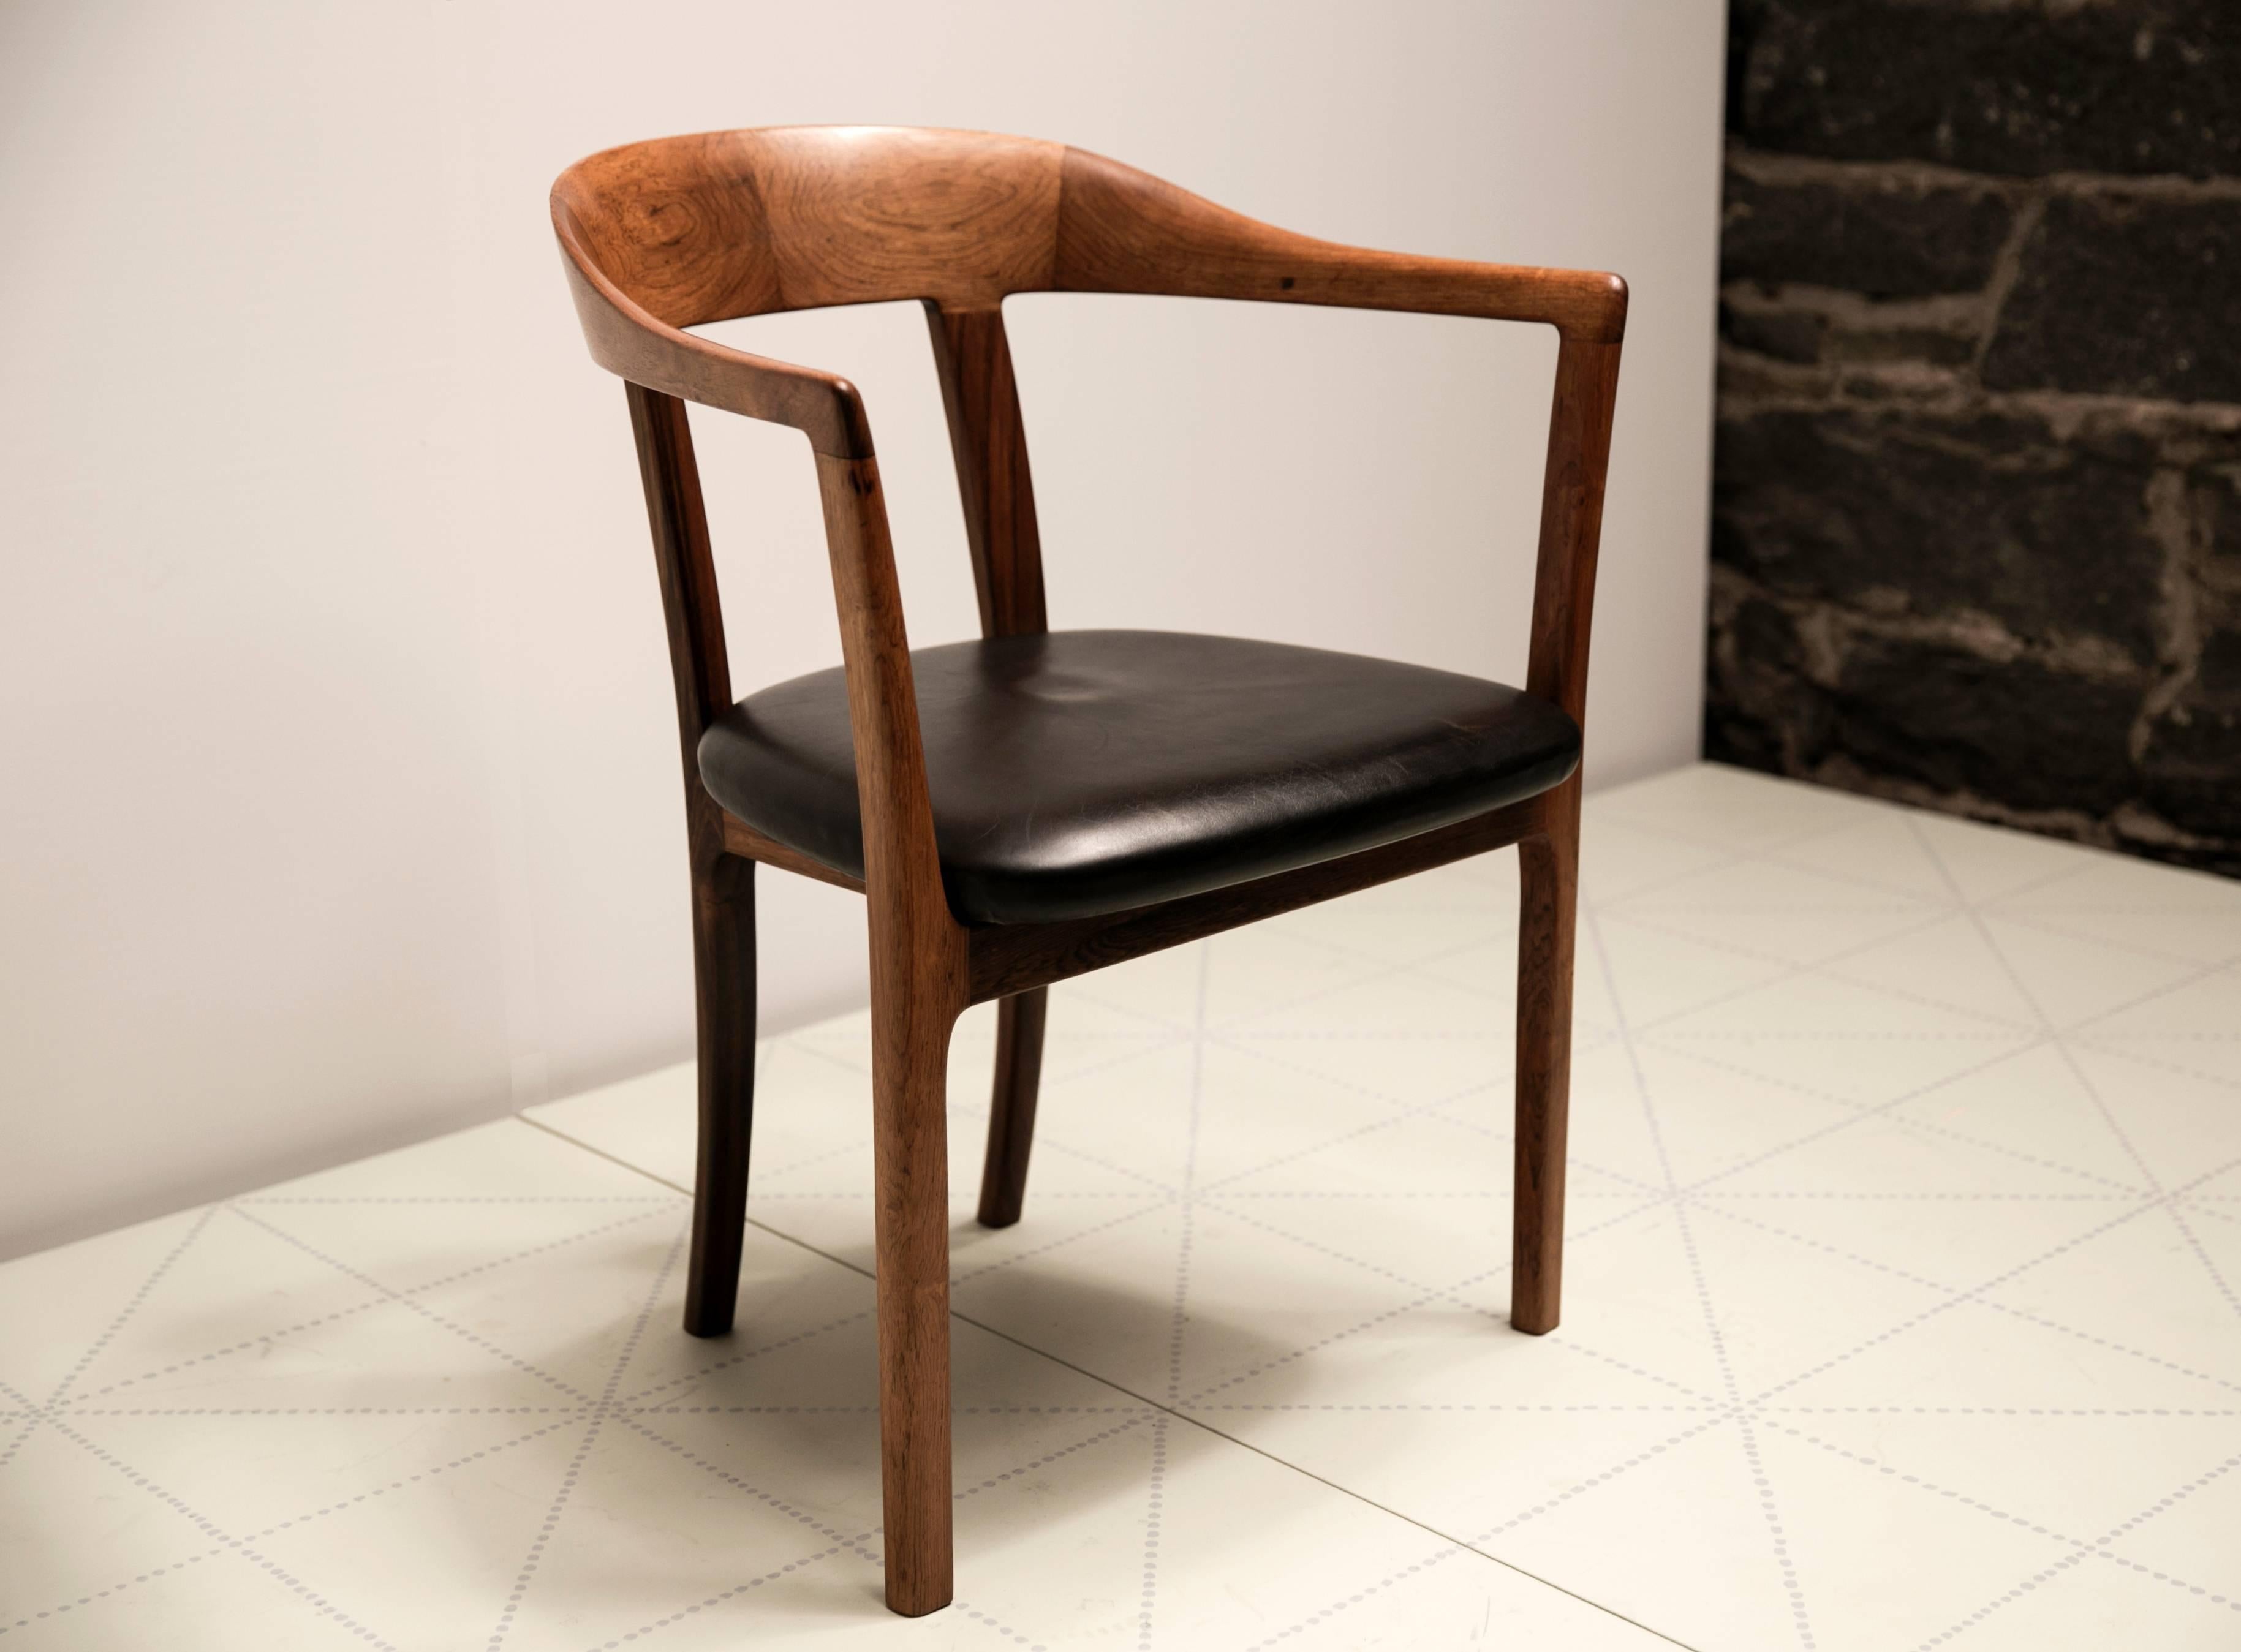 1958 Armchair in Brazilian Rosewood and Original Leather by Ole Wanscher. There are three versions of this chair. Two of the versions have top rails of wood and another of leather upholstery. In this version the top rail is expertly and simply